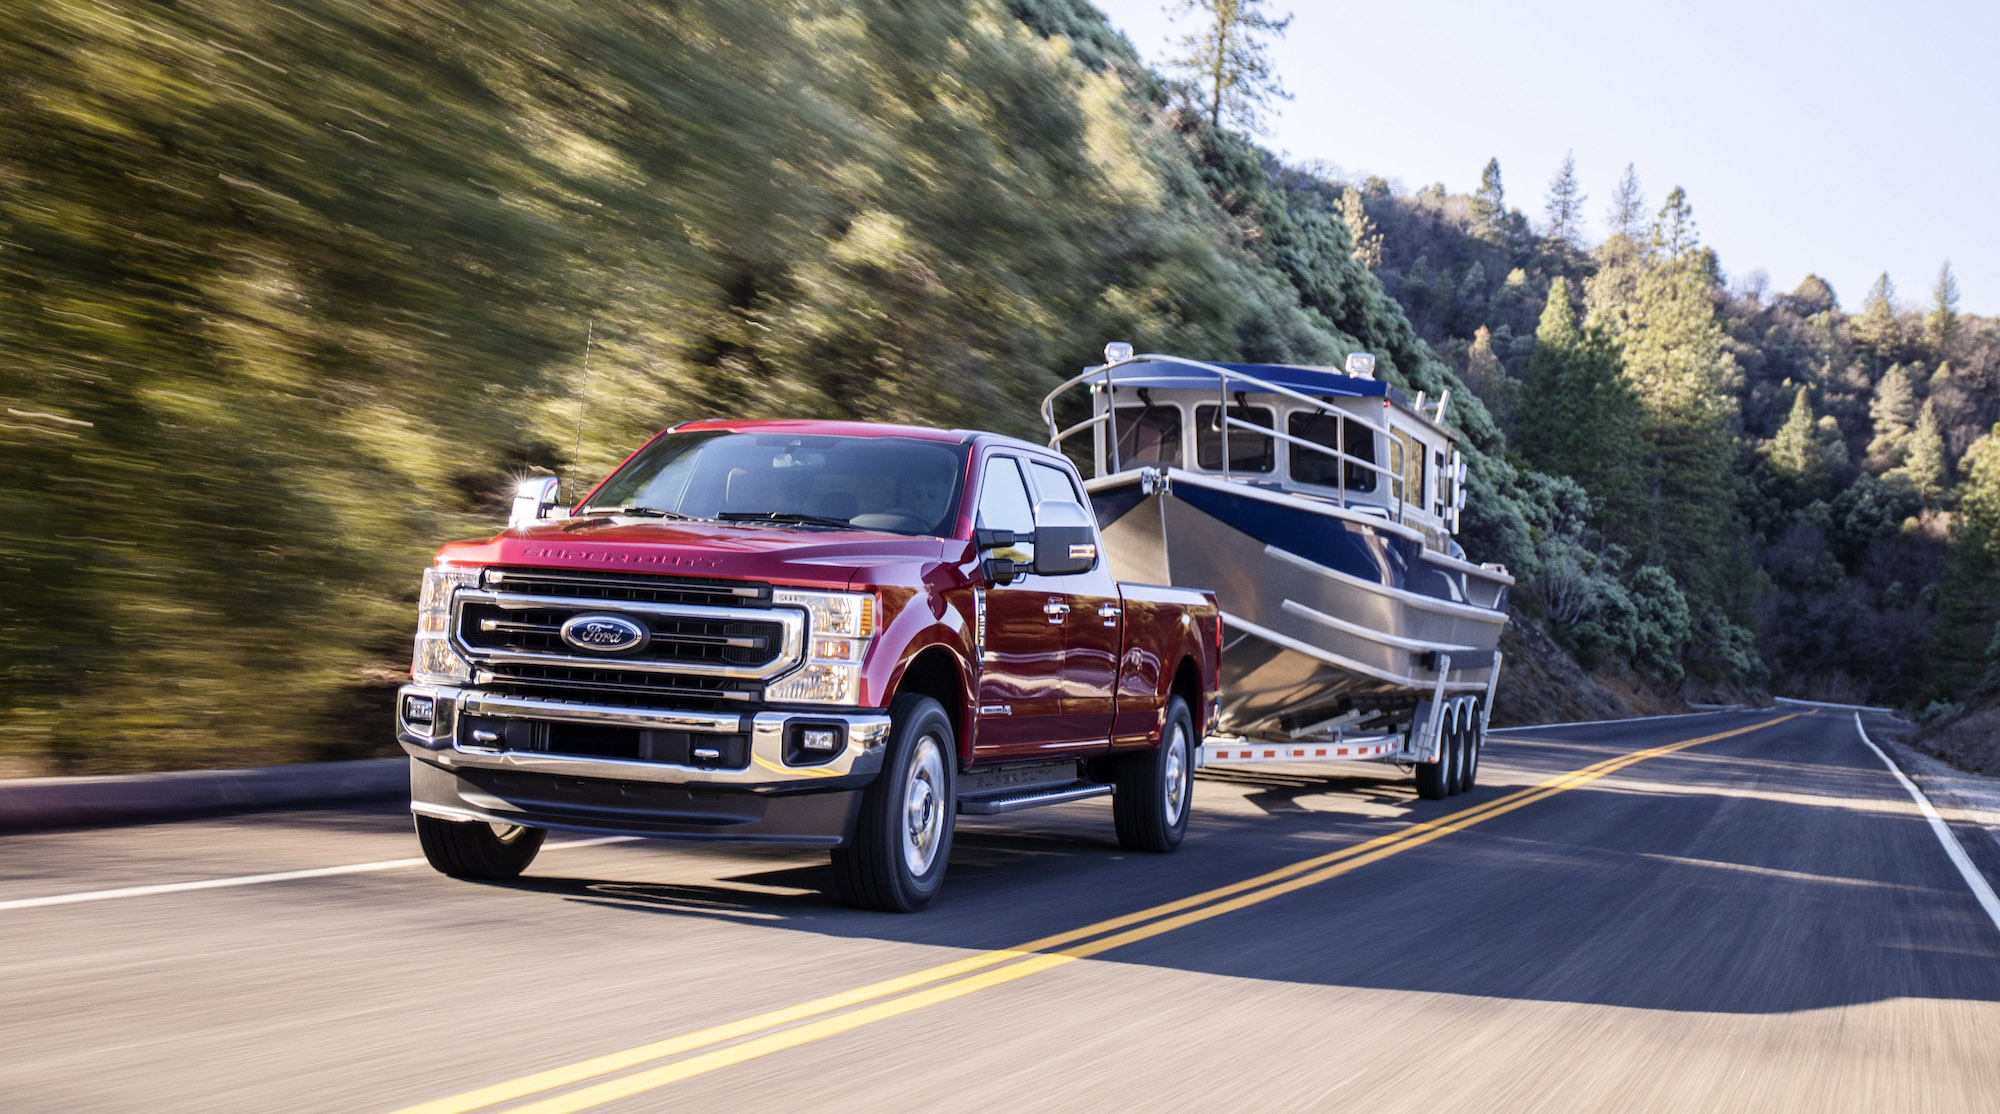 A red 2020 Ford F-250 King Ranch four-door diesel pickup truck towing a boat on a two-lane highway flanked by hills and pine trees